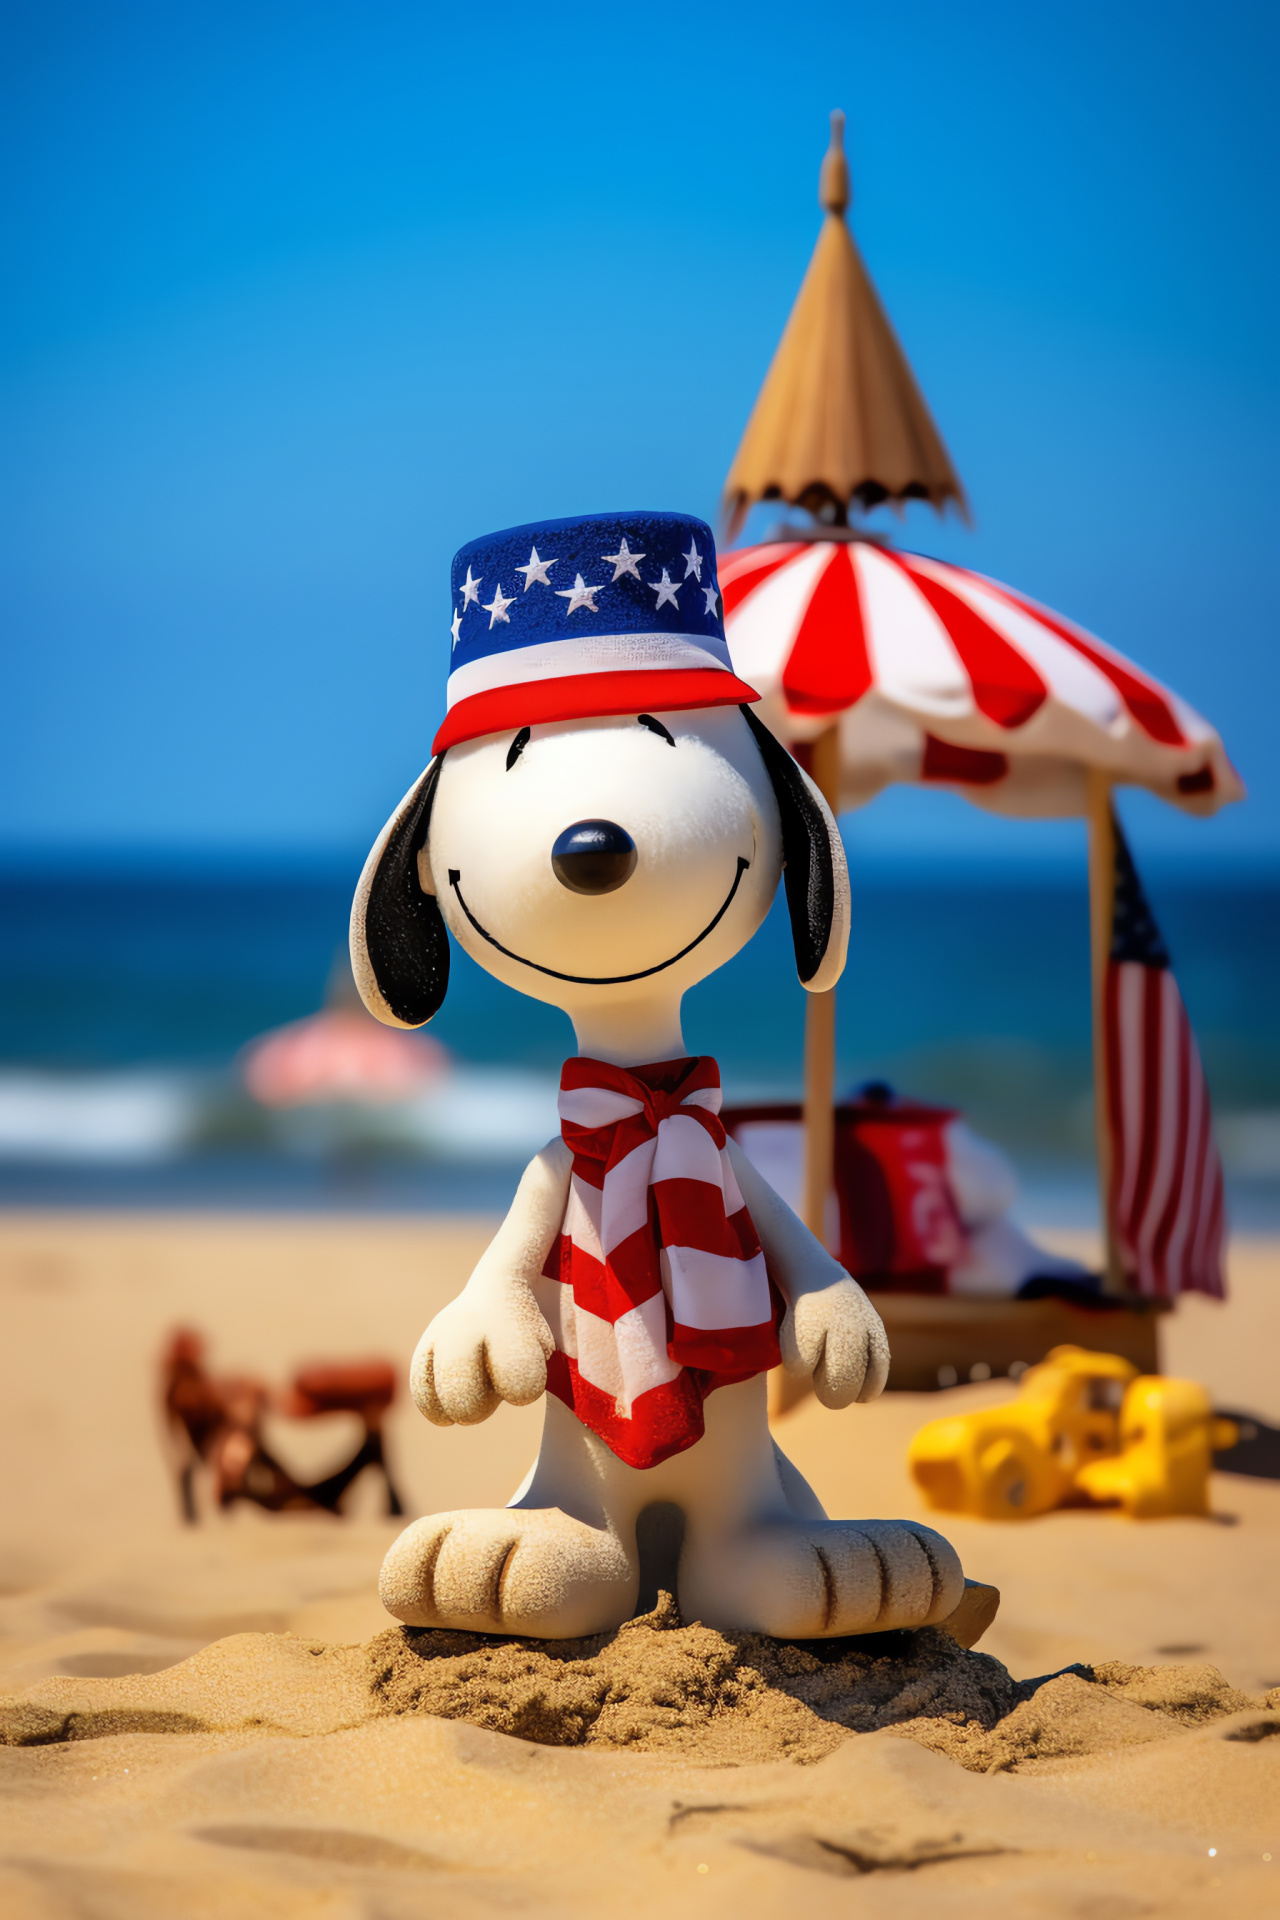 Patriotic Snoopy cartoon, 4th of July celebration, summertime beach, sandcastle fun, stars and stripes, HD Phone Image